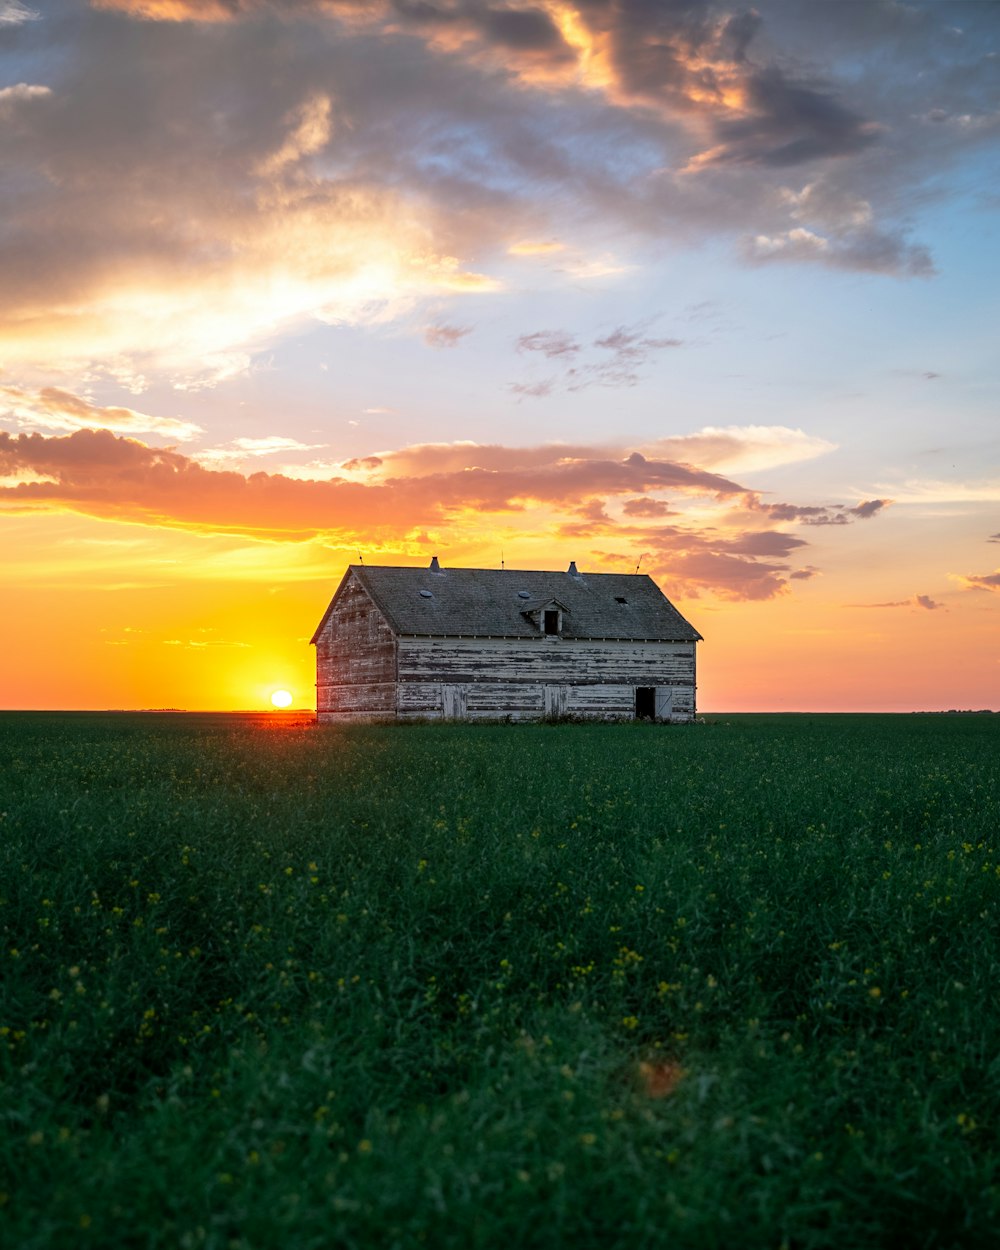 red and gray barn on green grass field during sunset